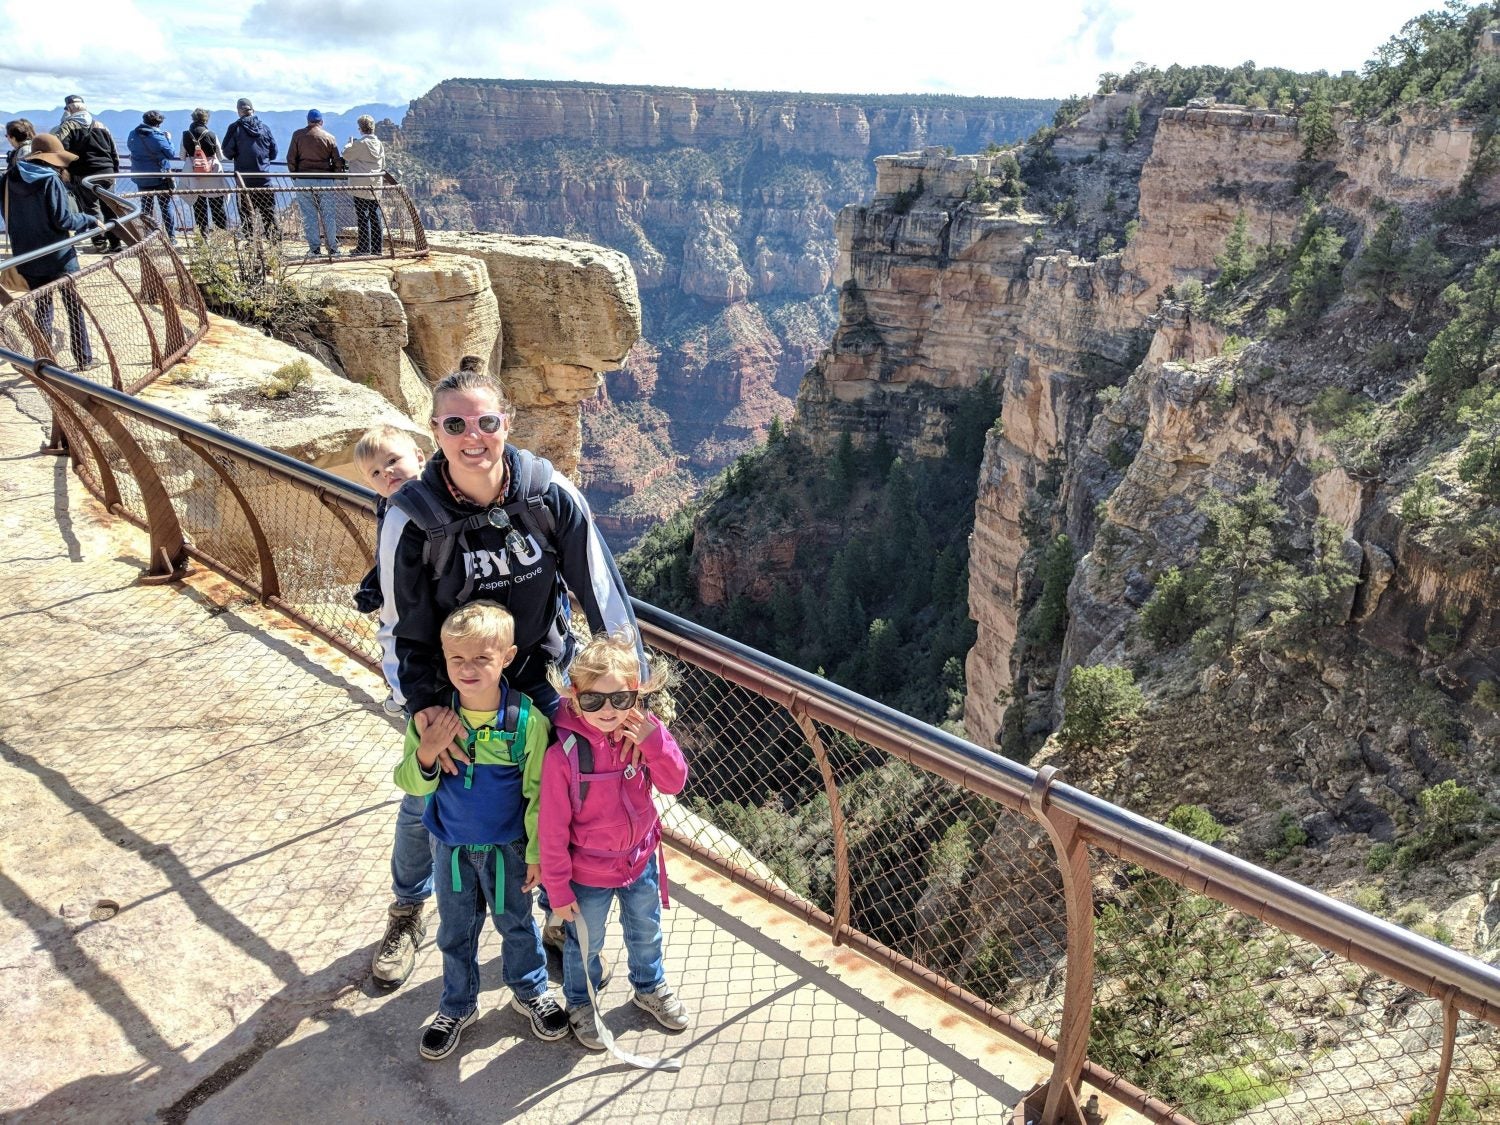 a mother and her two children pose for the camera at the edge of a canyon